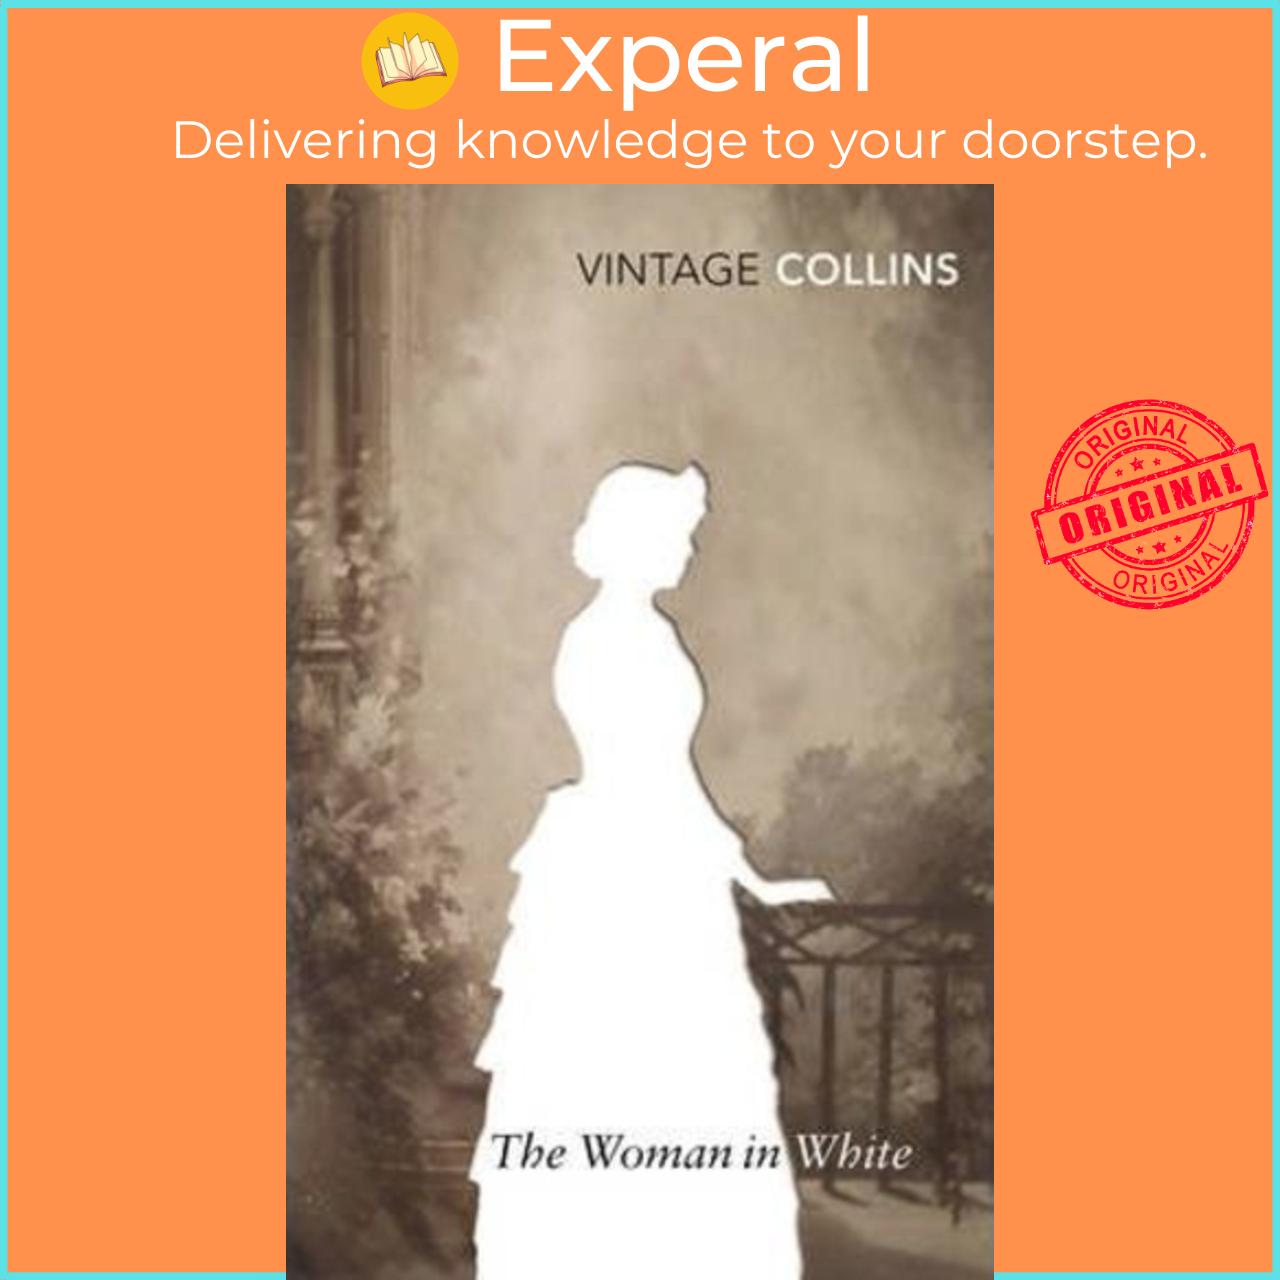 Sách - The Woman in White by Wilkie Collins (UK edition, paperback)